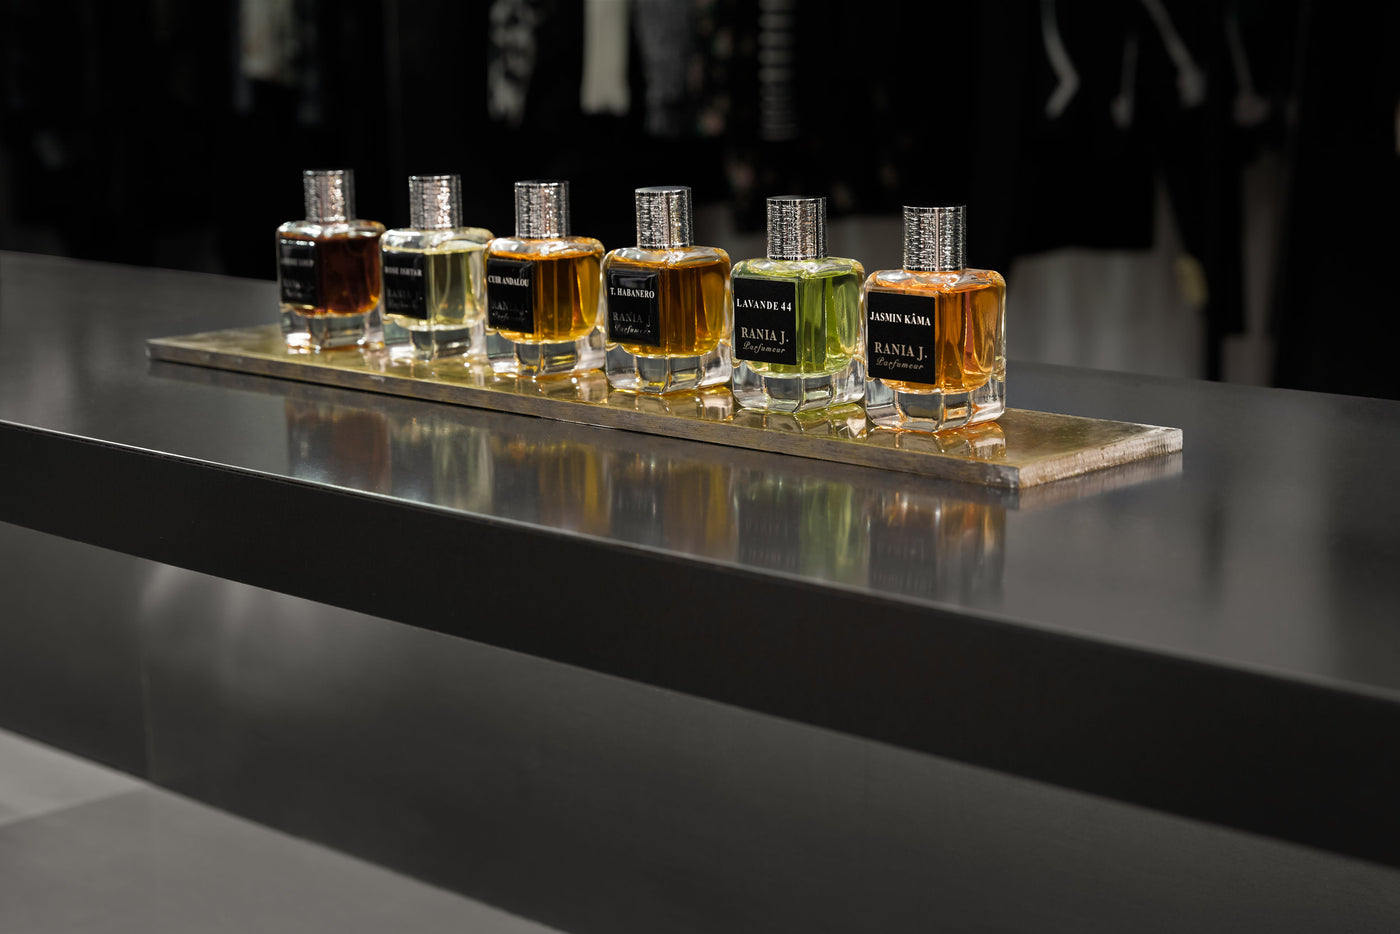  H Parfums Montreal. Find niche perfumes at H Parfums, our Montreal perfume store